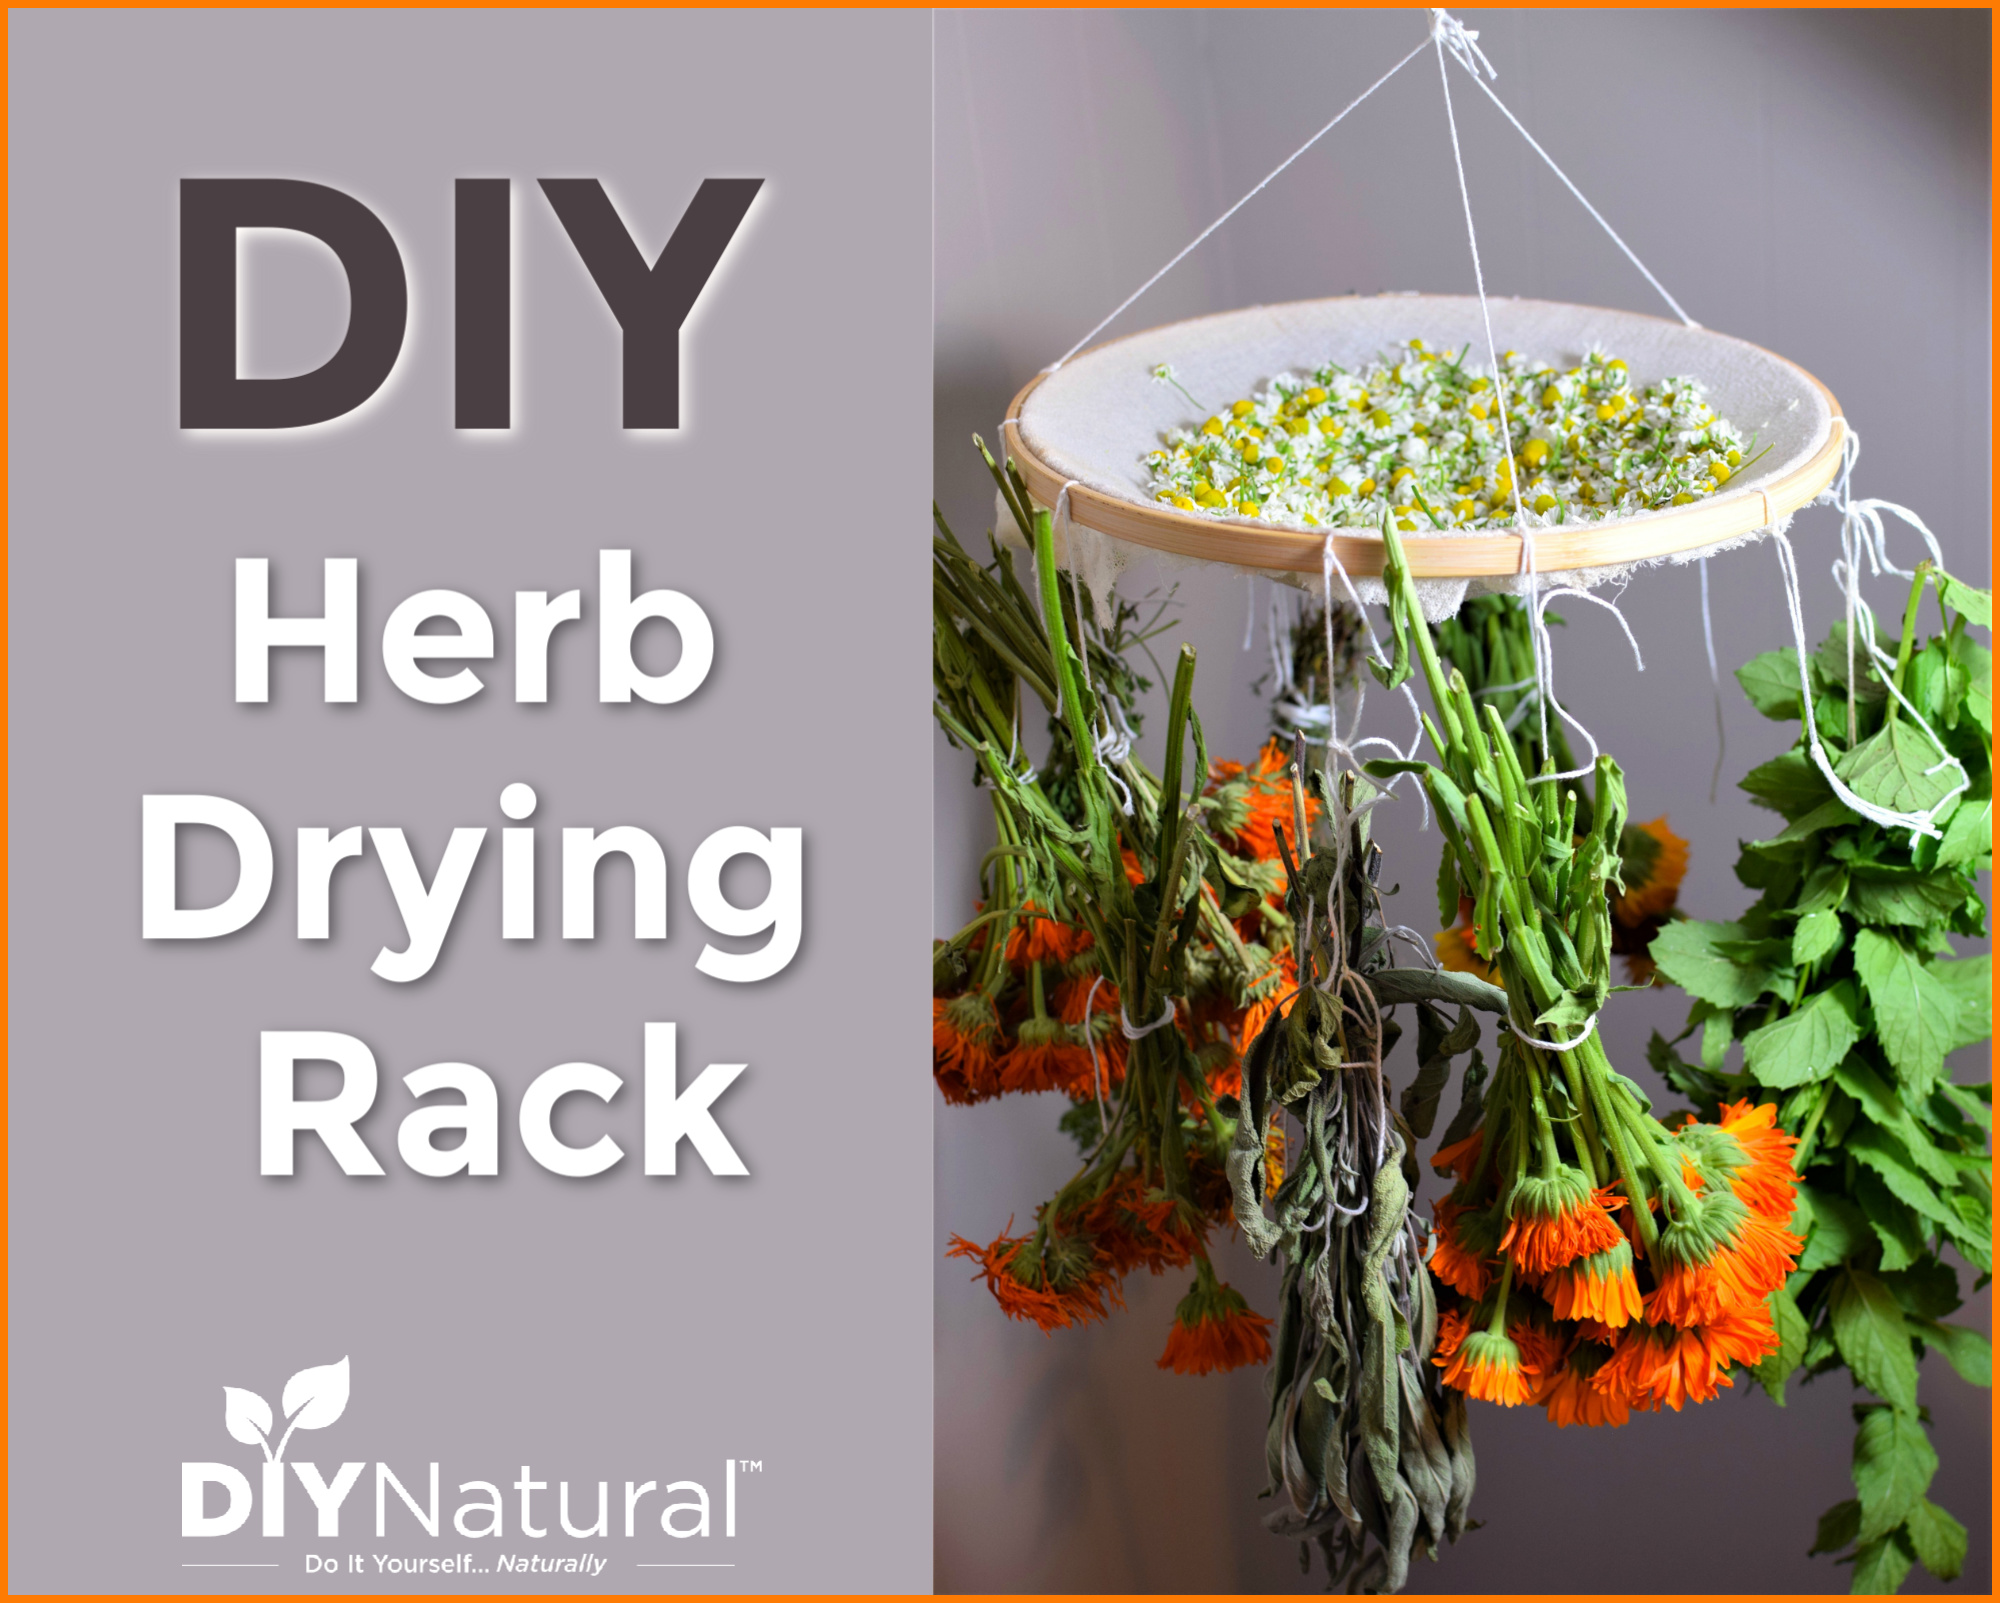 DIY Herb Drying Rack from a Repurposed Picture Frame